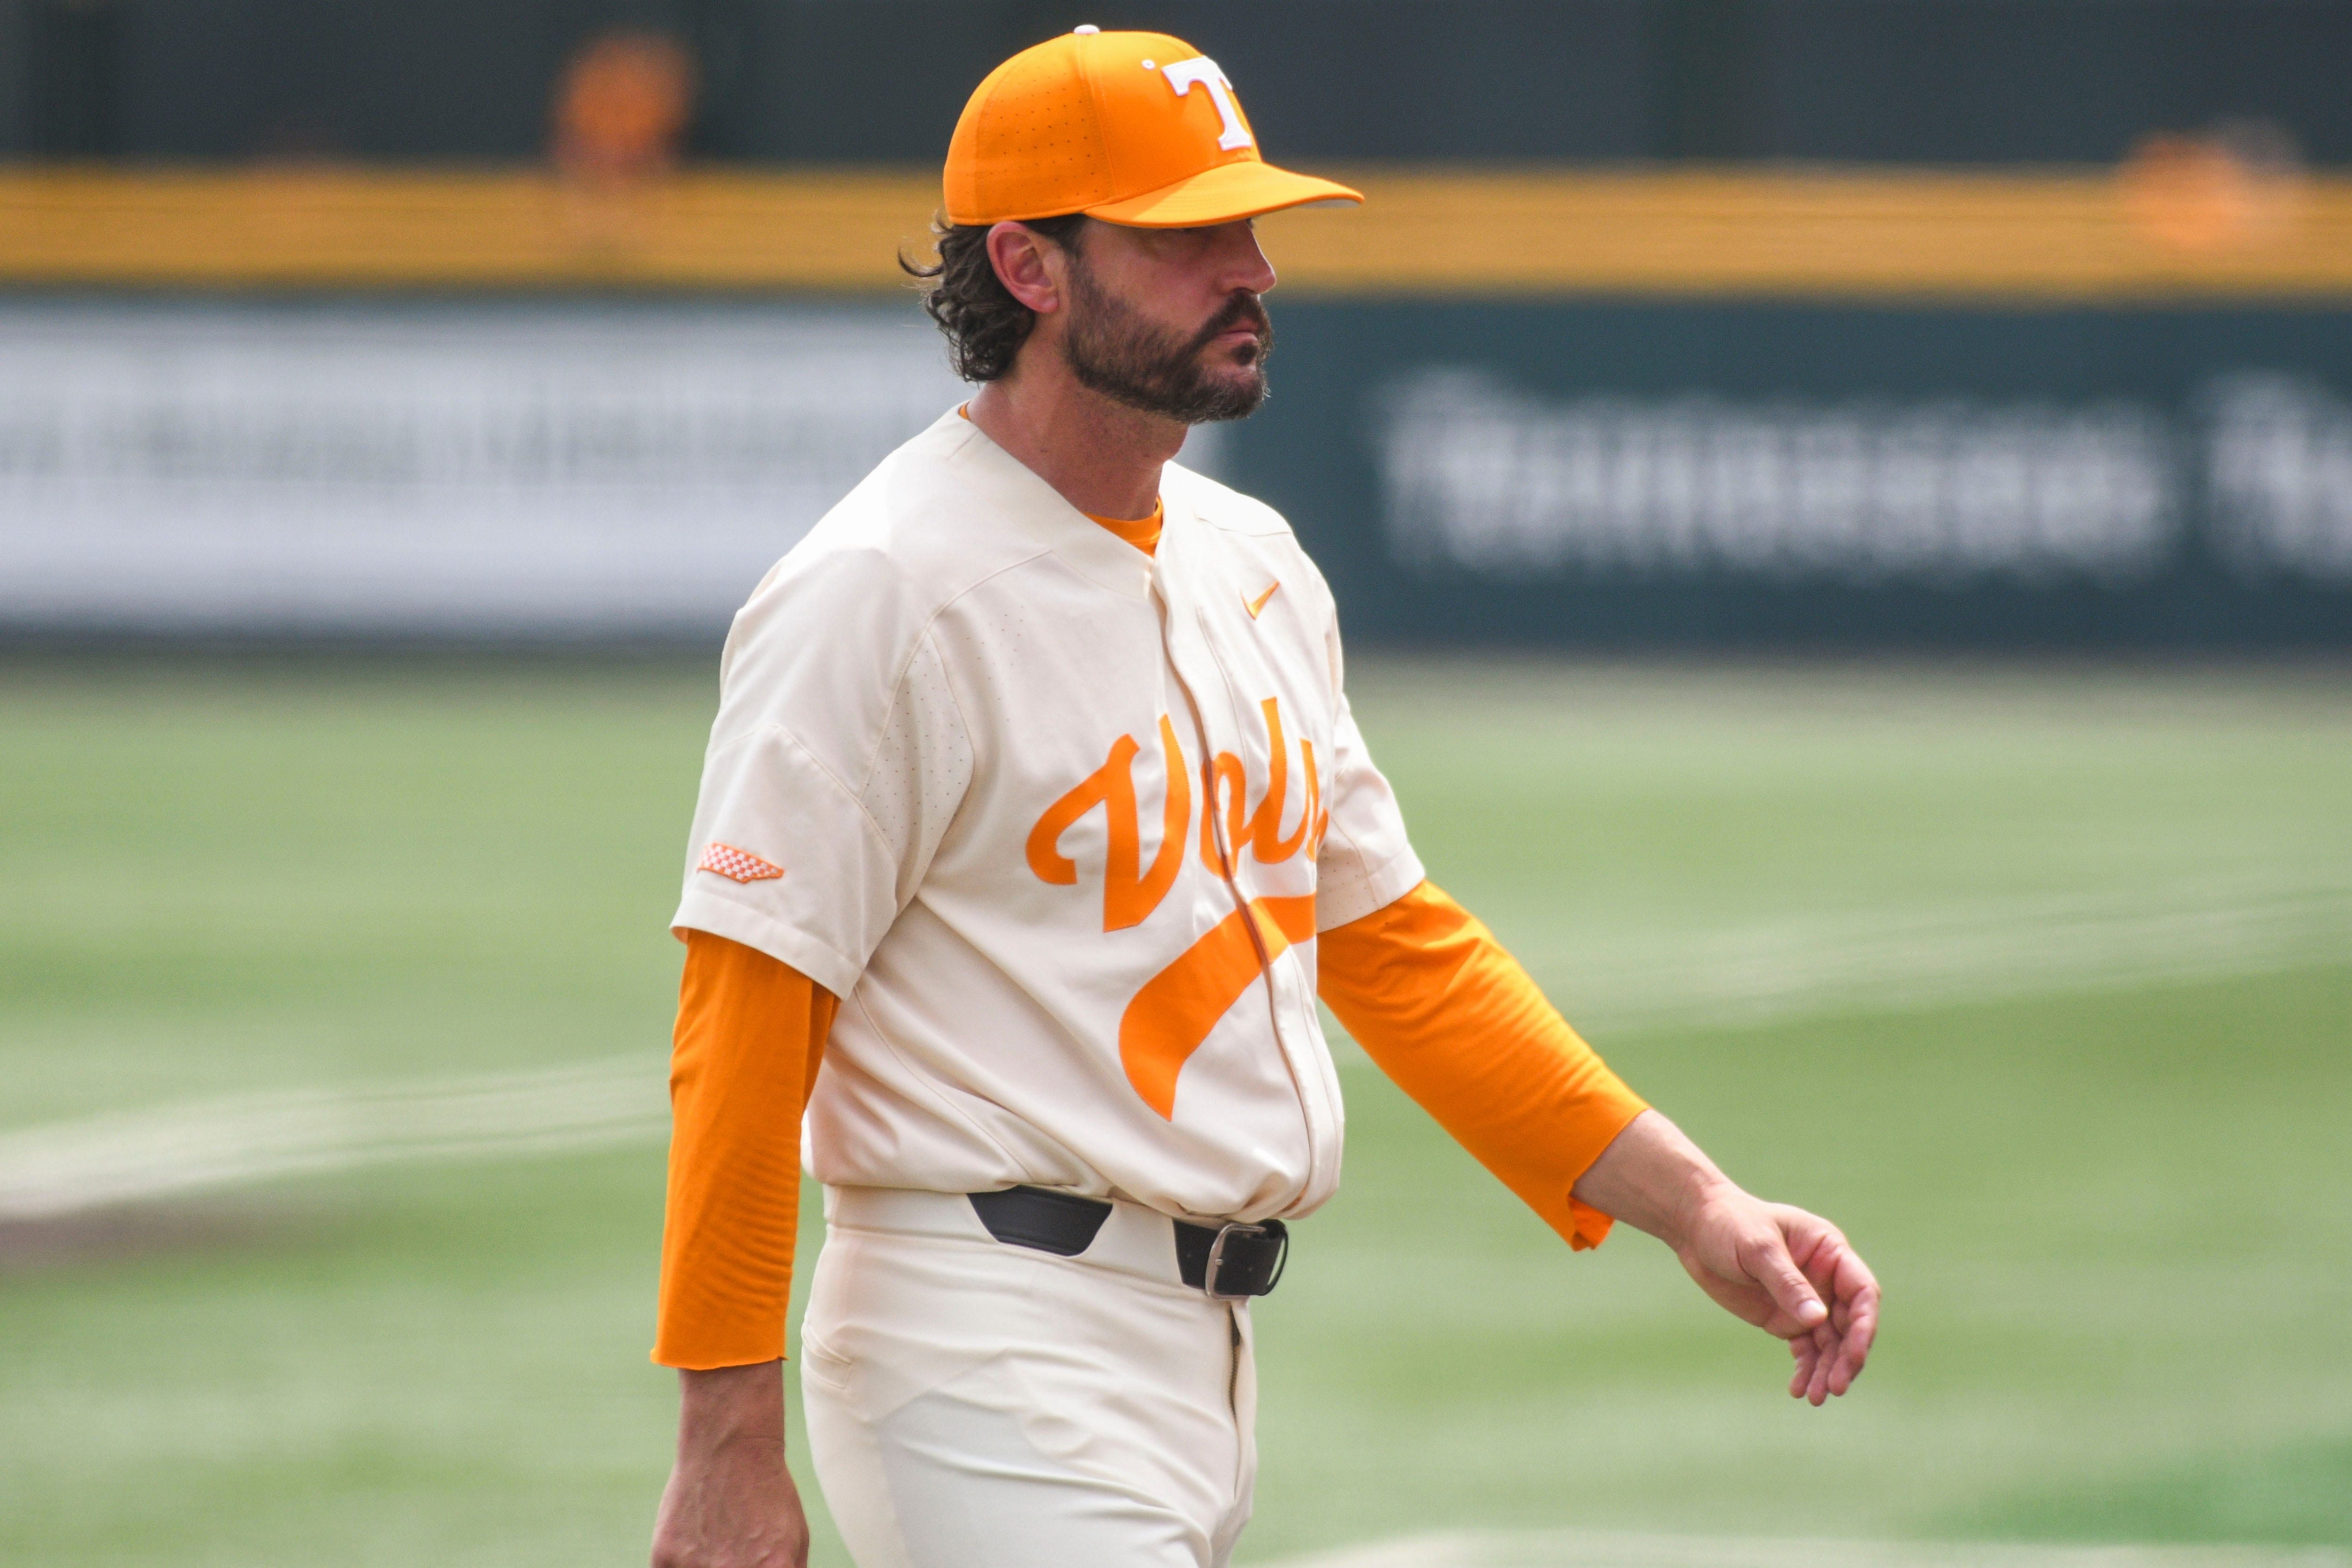 Tony Vitello and Tennessee will battle in an SEC semifinal with Vanderbilt today.